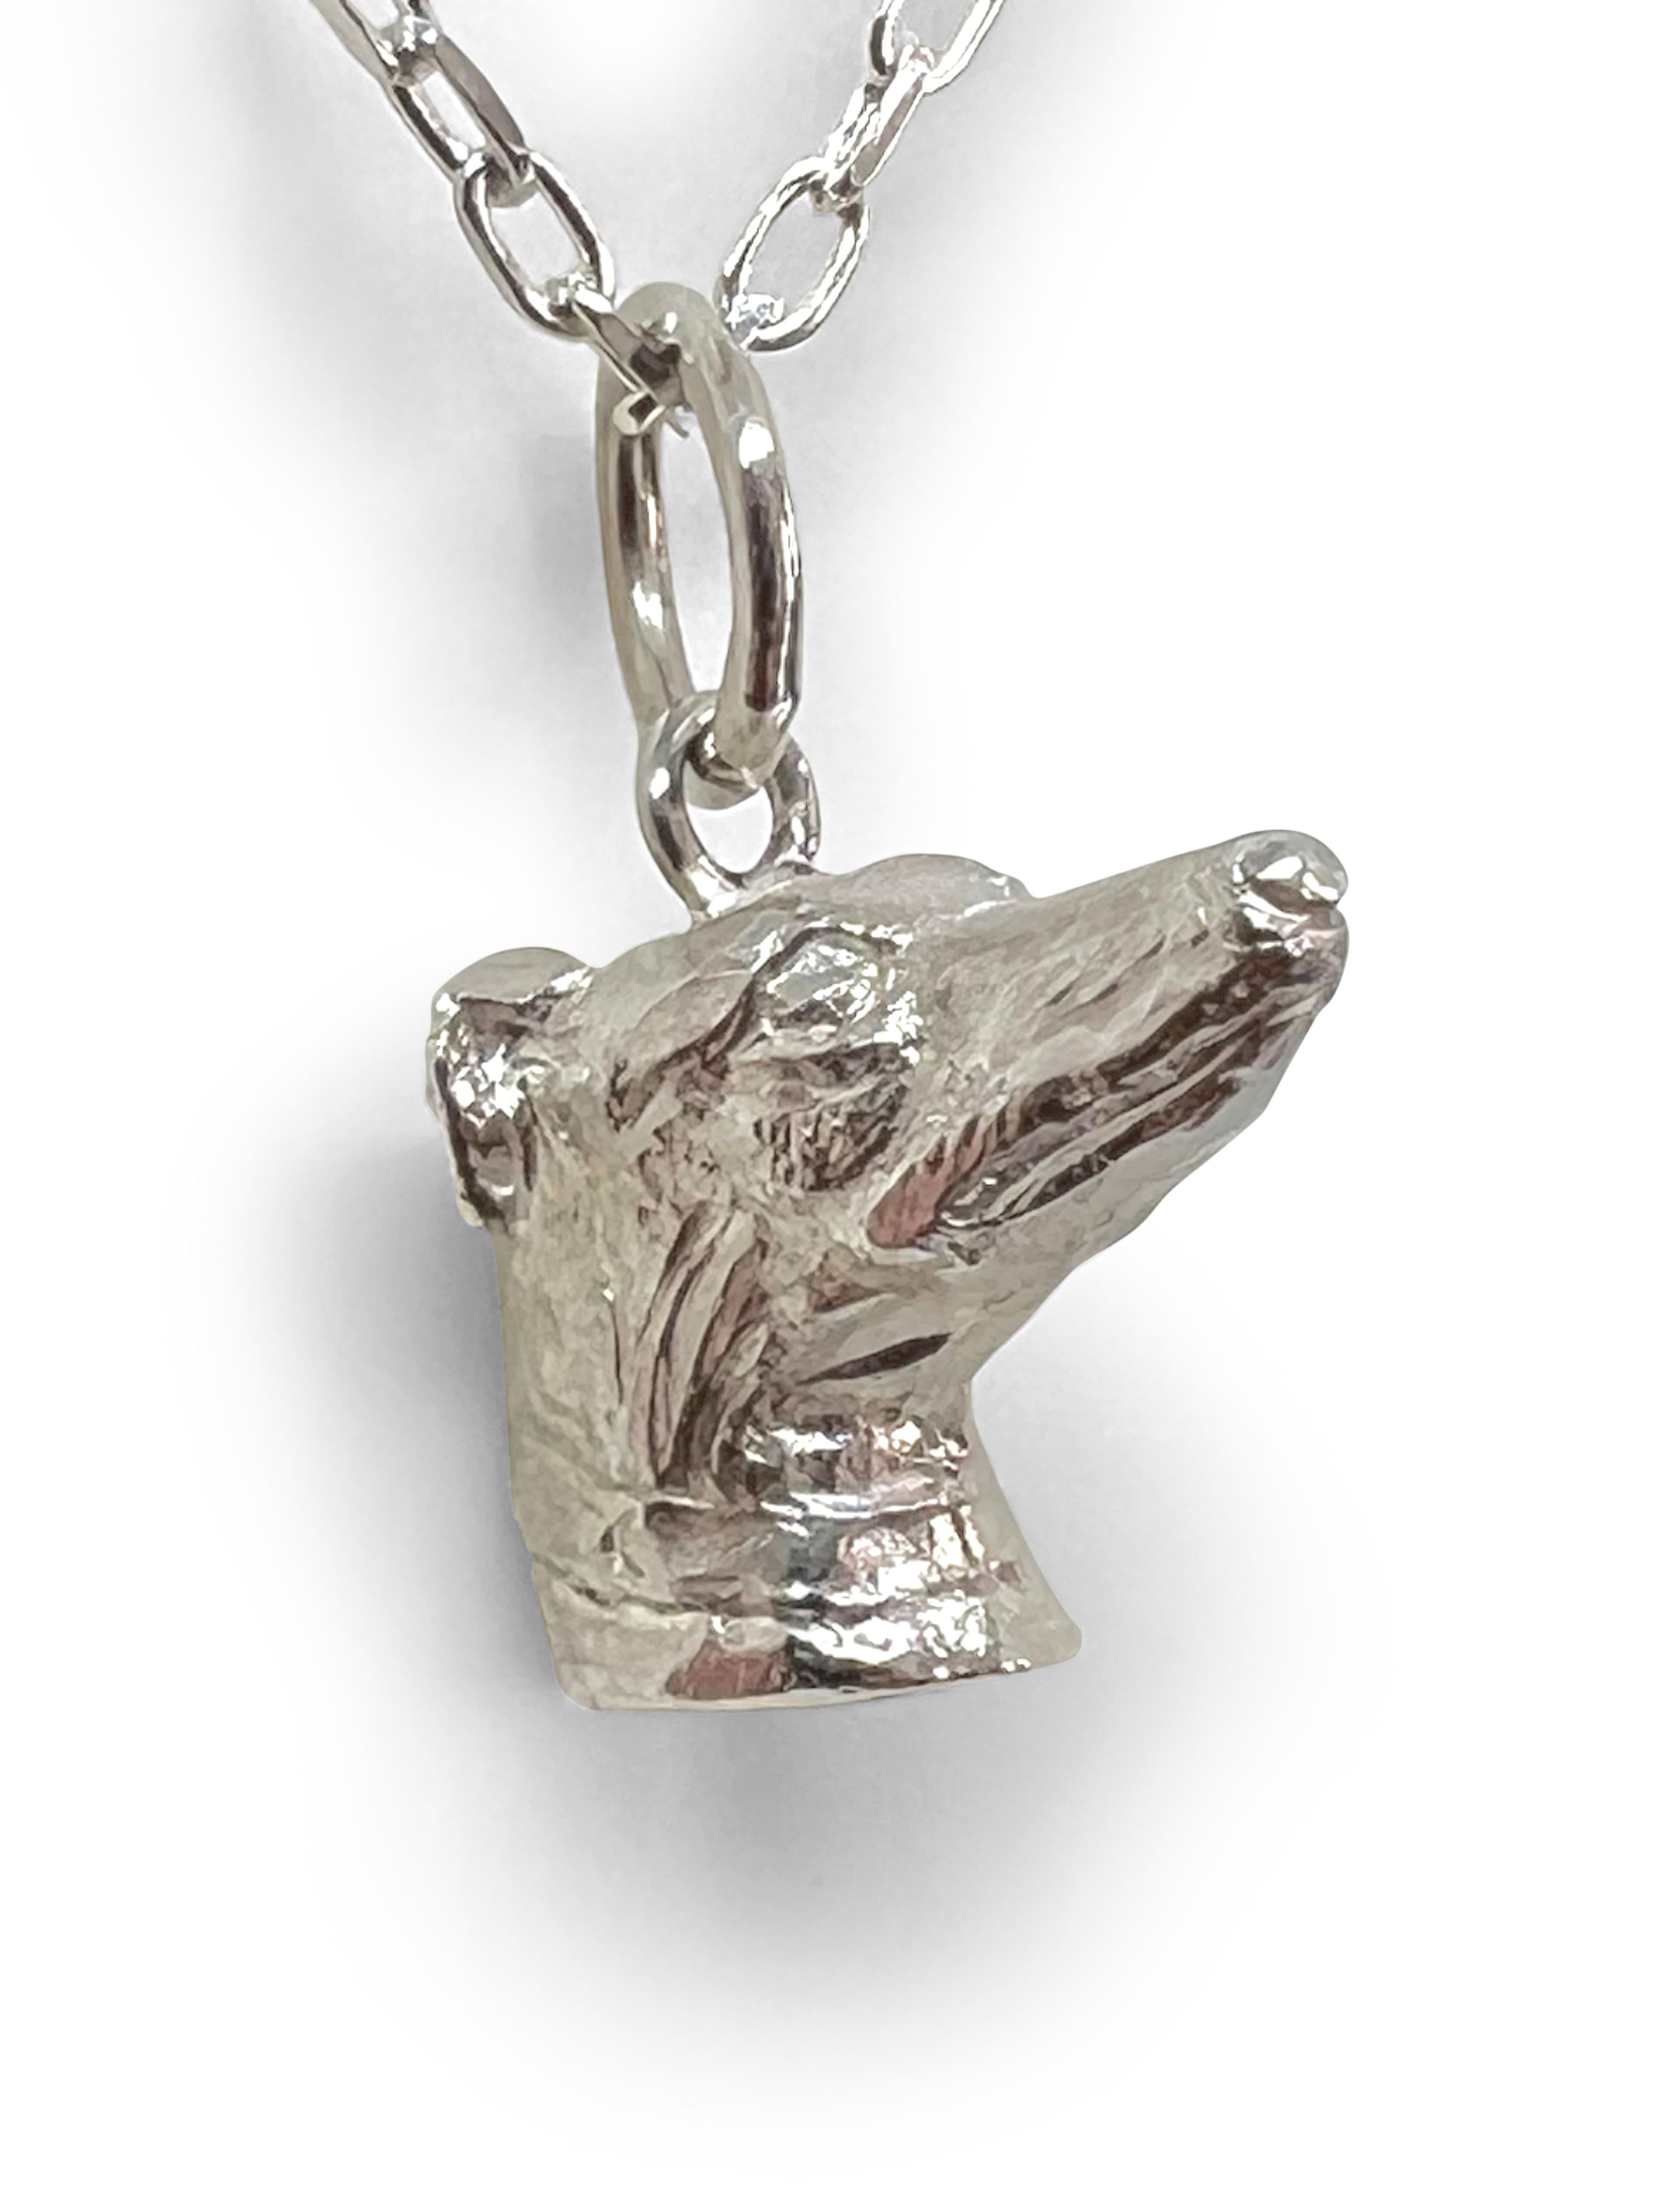    From Great Britain Paul Eaton VPRMS MAA sculpted a Greyhound dog head pendant (3/4